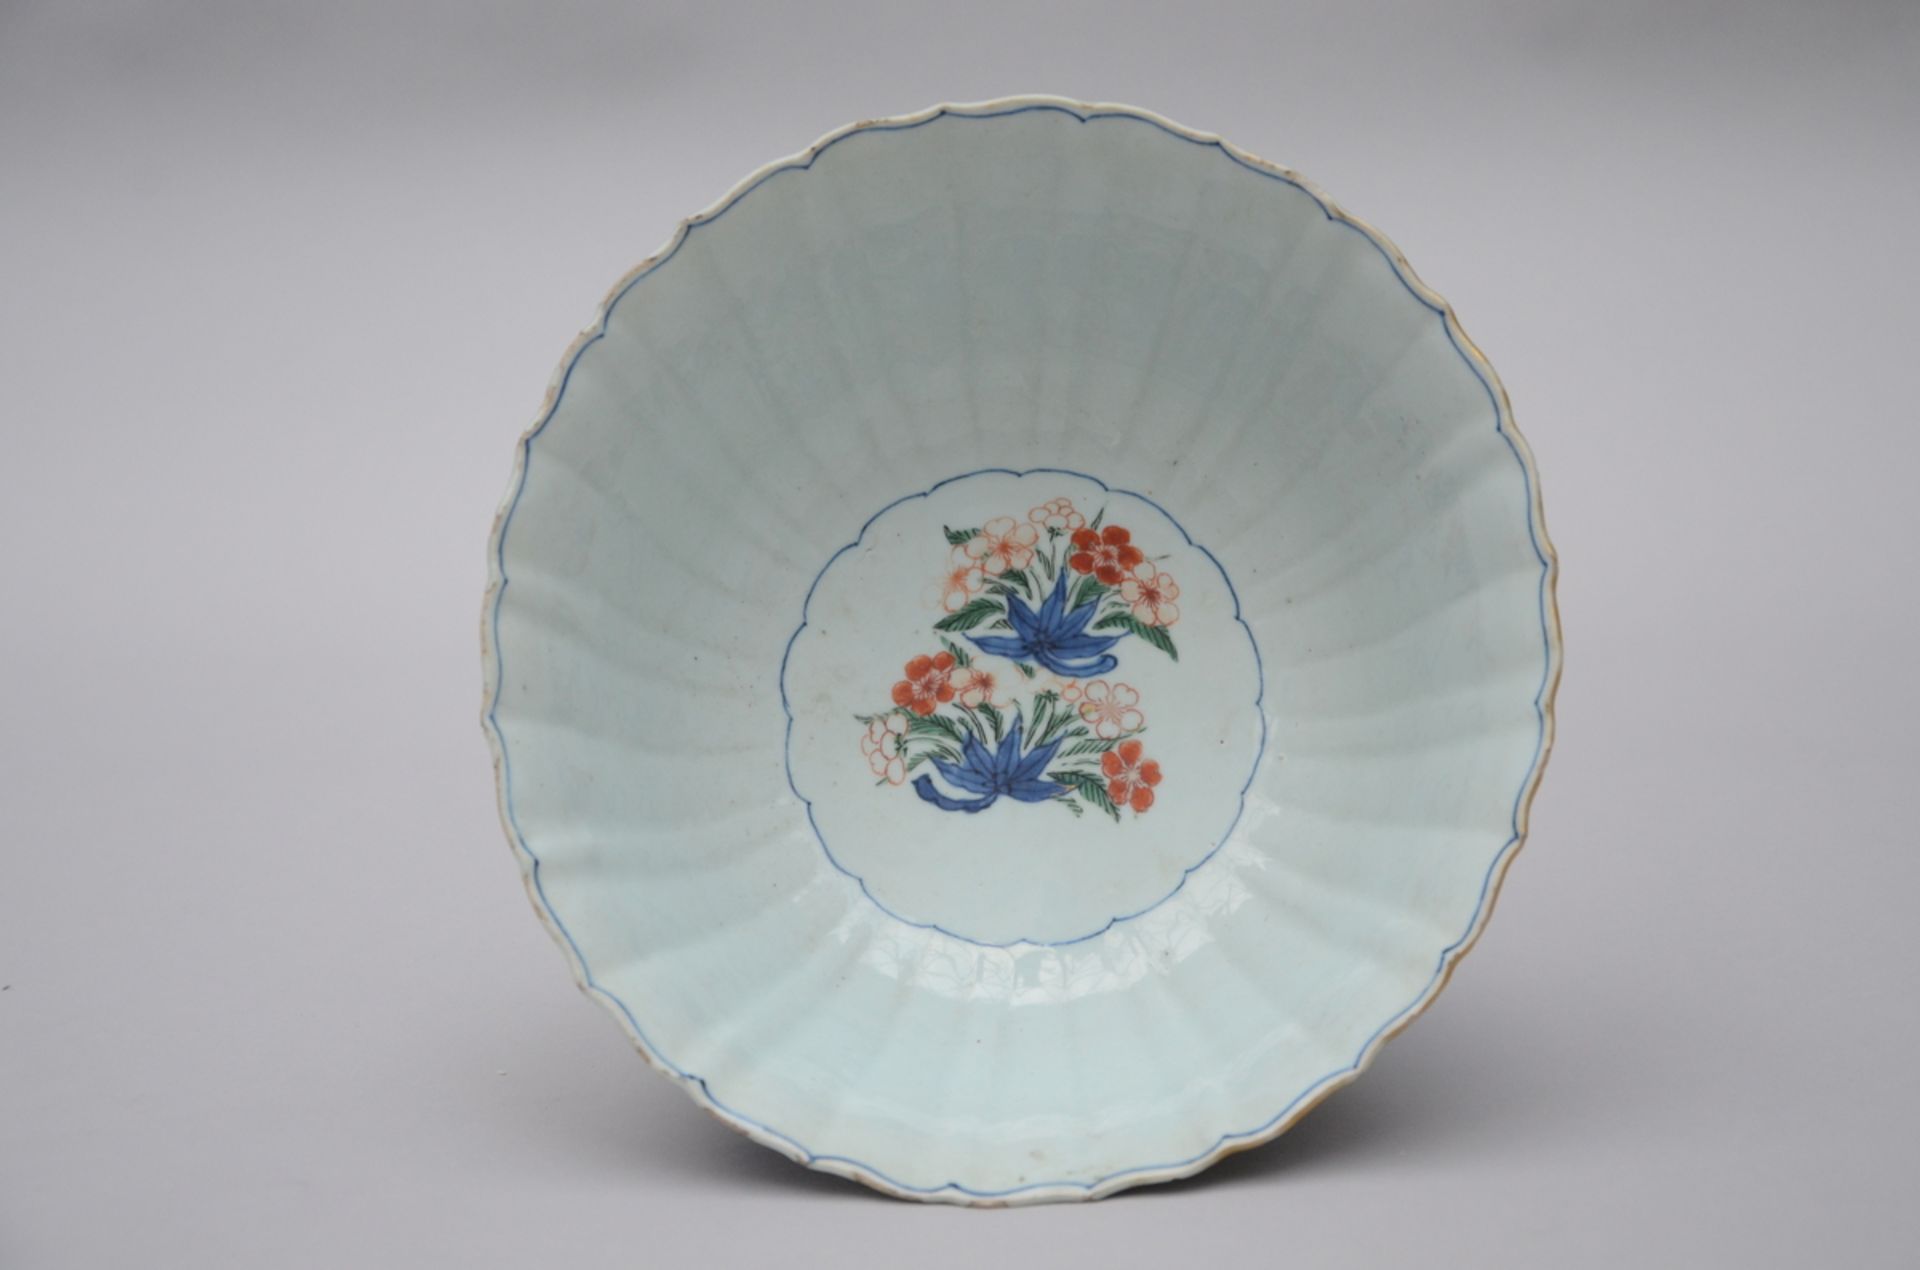 Lobed bowl in Chinese famille verte porcelain, Kangxi period (13x25.5 cm) - Image 2 of 4